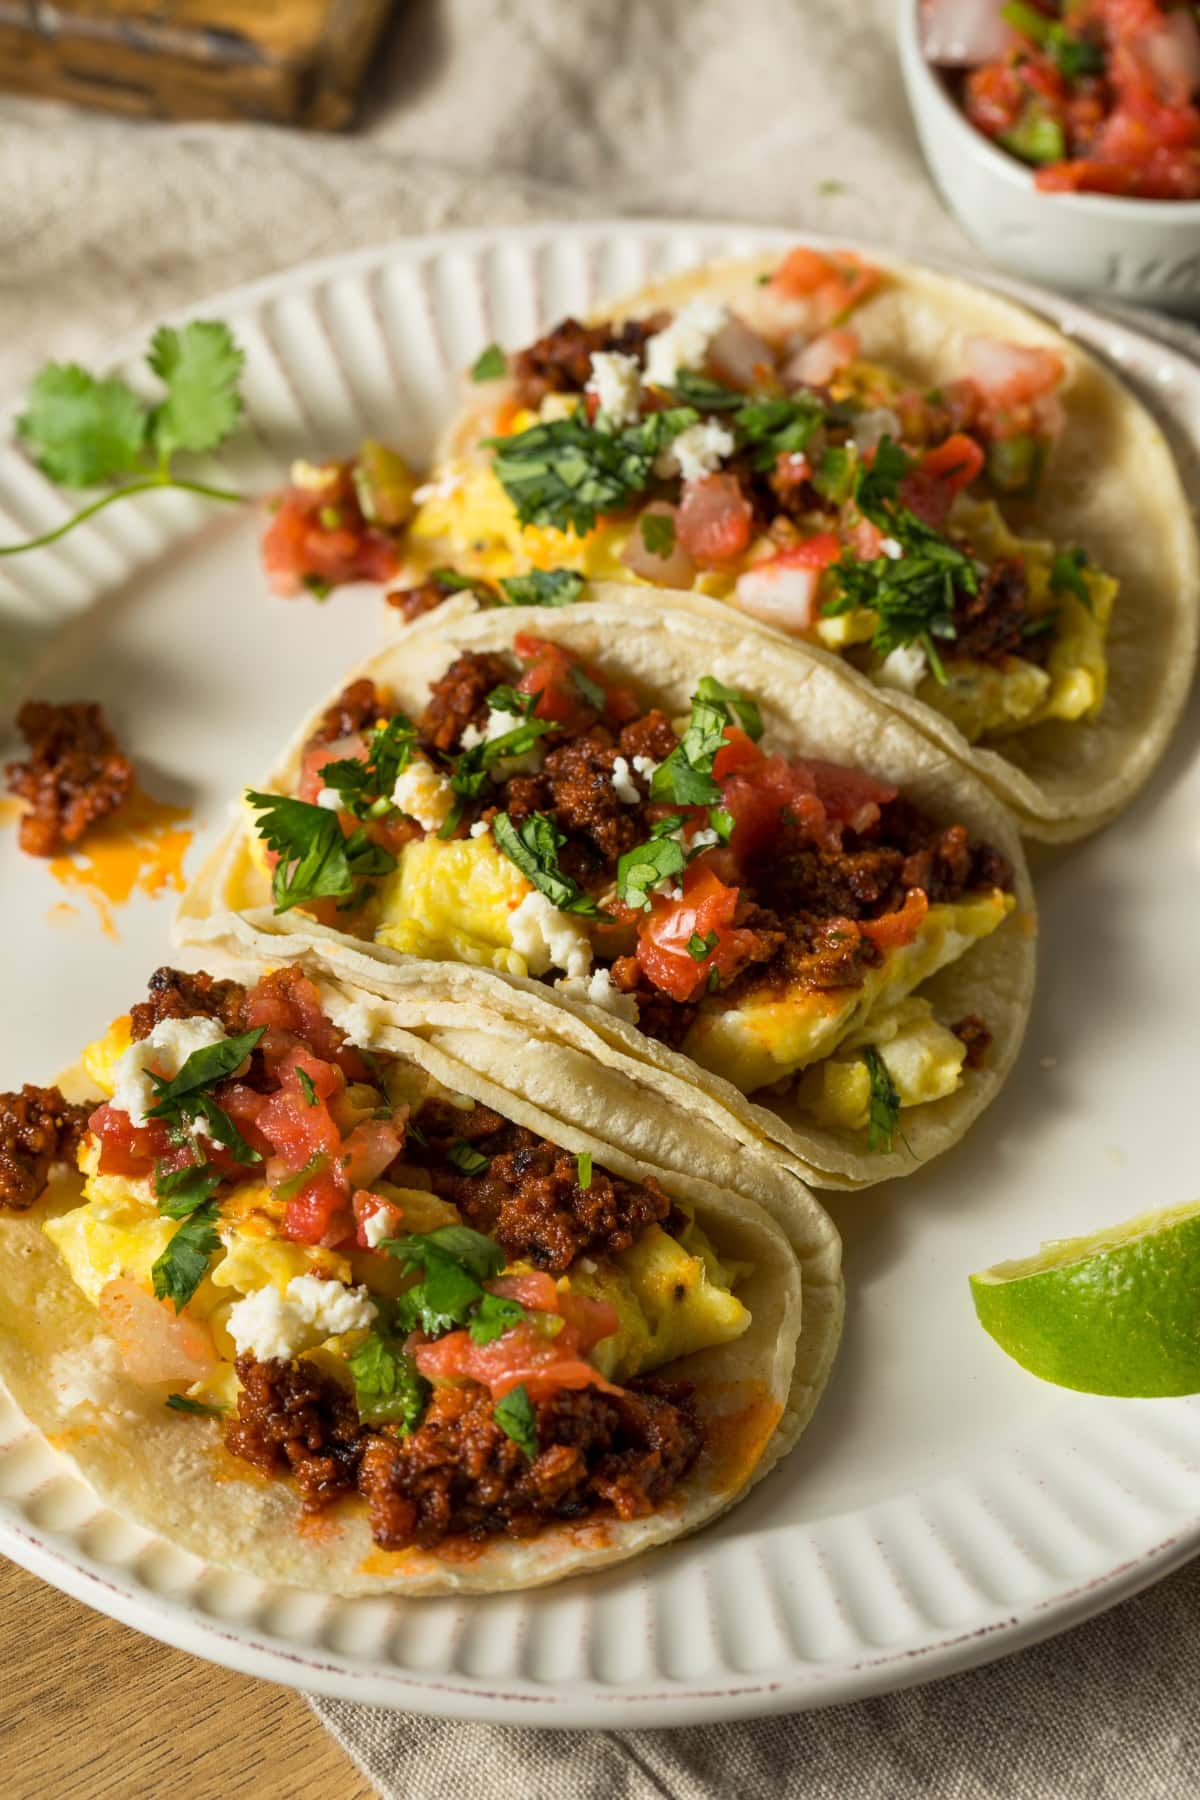 Homemade Soyrizo Tacos with Egg and Tomatoes